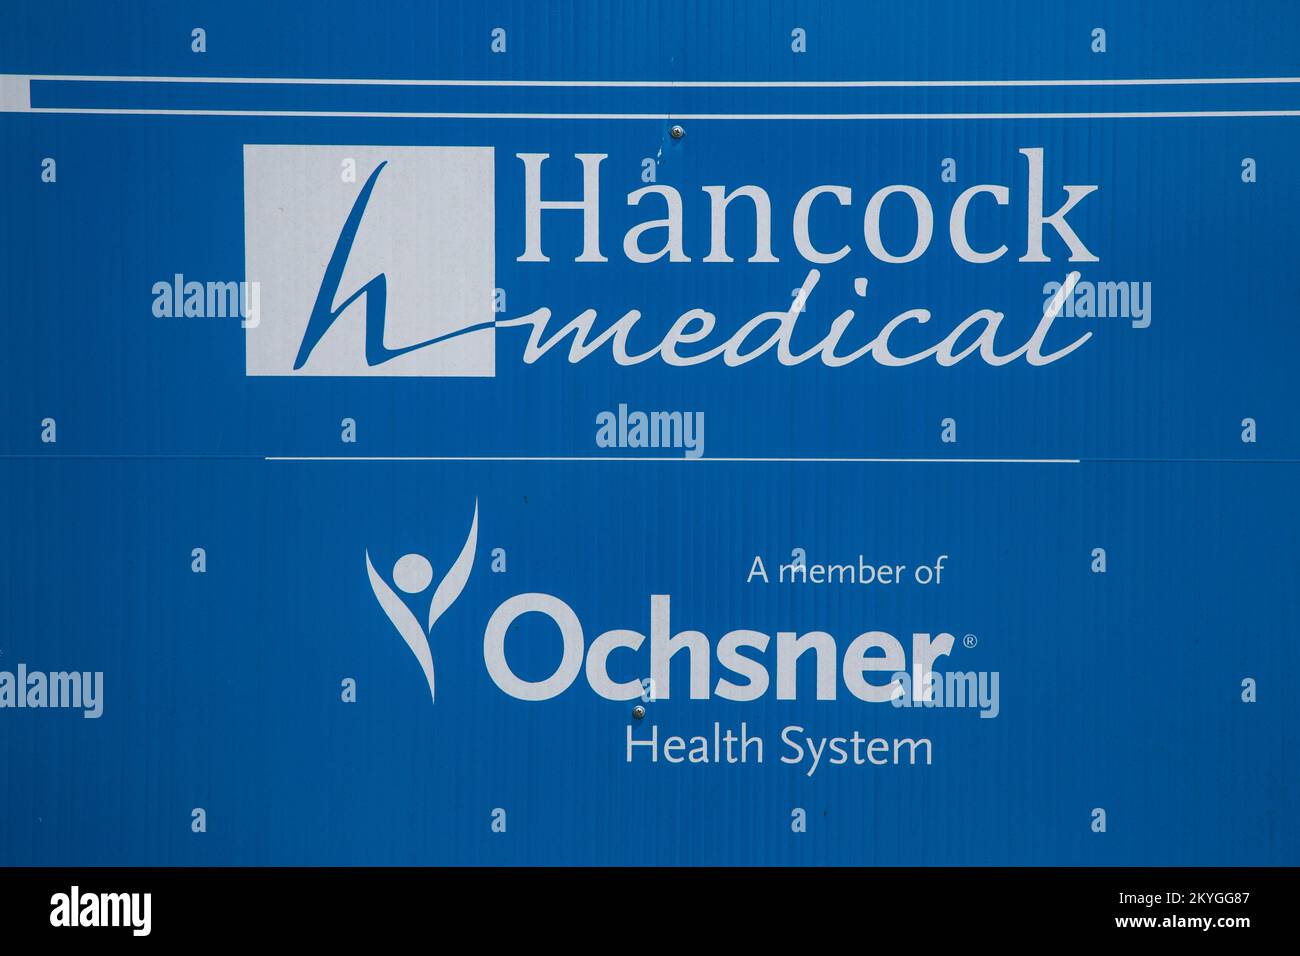 Bay Saint Louis, MS, May 22, 2015 - Signage for Hancock Medical Center, Bay Saint Louis, Mississippi. Established in 1960 as the Hancock General hospital, the hospital eventually evolved into the Hancock Medical Center. The medical center is currently a member of the Ochsnper Health System and serves a population of over 44,000 residents in Hancock County. The medical center was severely damaged by Hurricane Katrina in 2005. The Hancock Medical Center was restored with public assistance and mitigation assistance from FEMA. Stock Photo